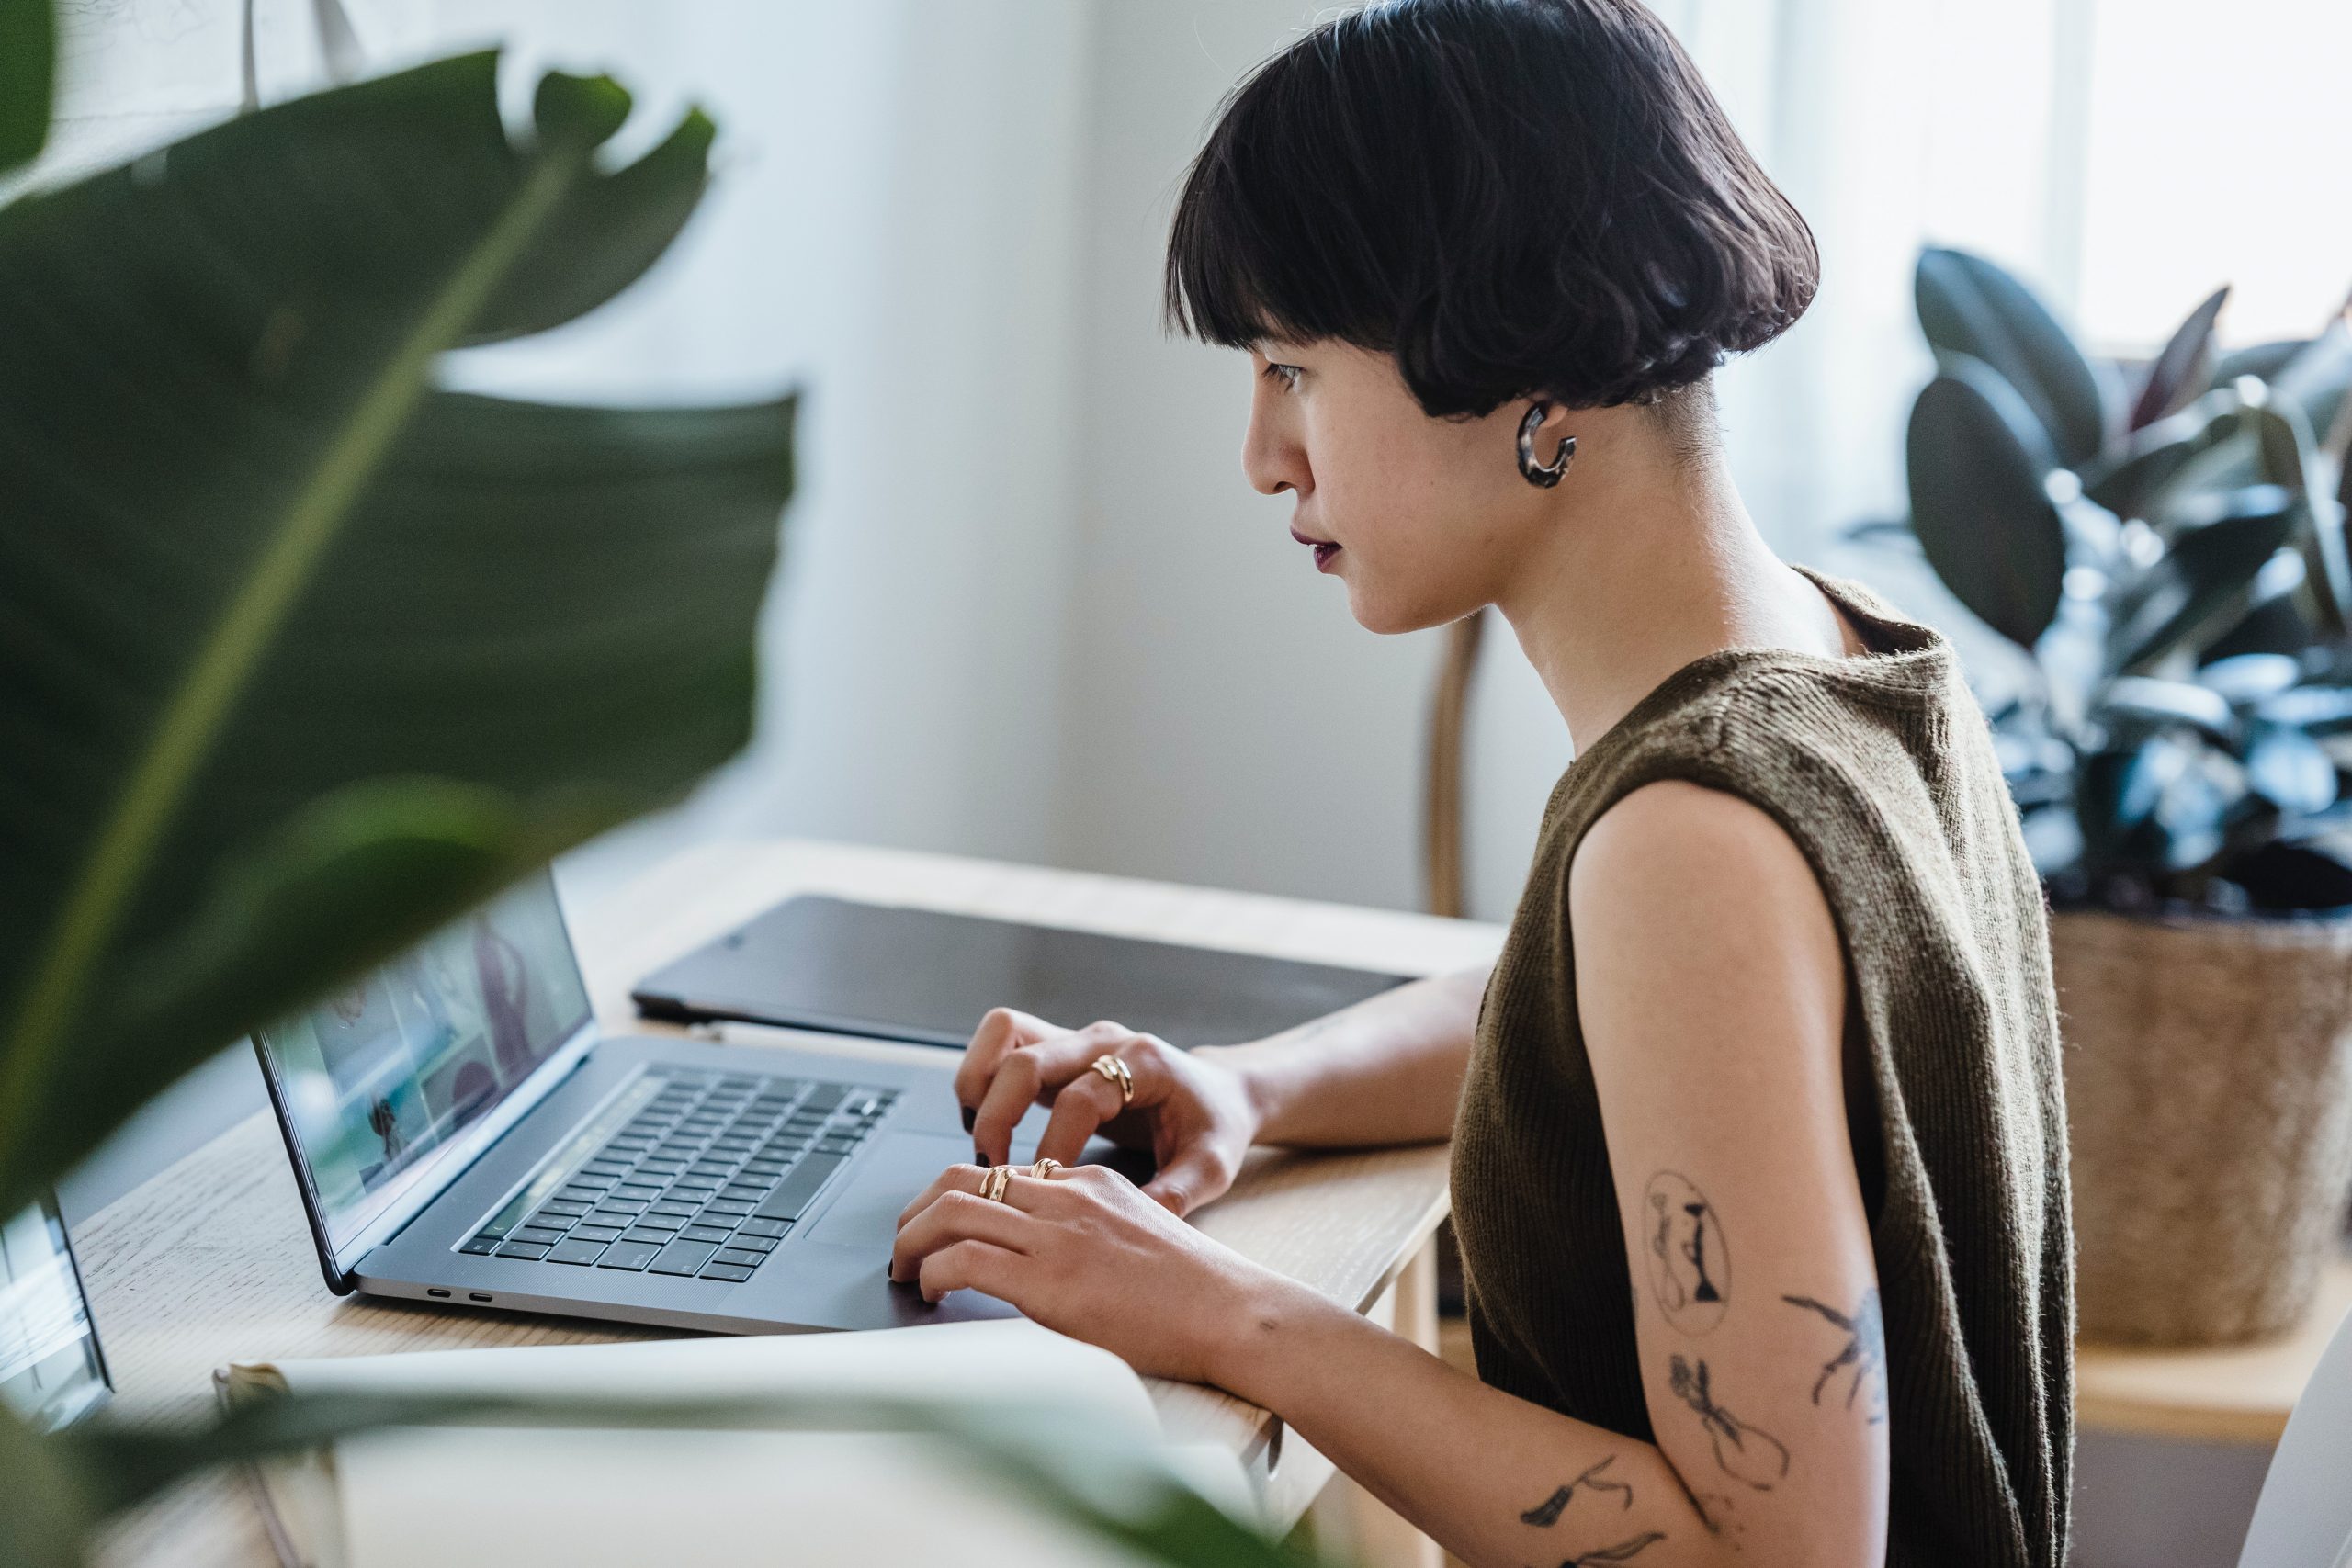 A queer nonbinary Asian person with short hair and tattoos sits in front of their laptop at a desk while working from home.